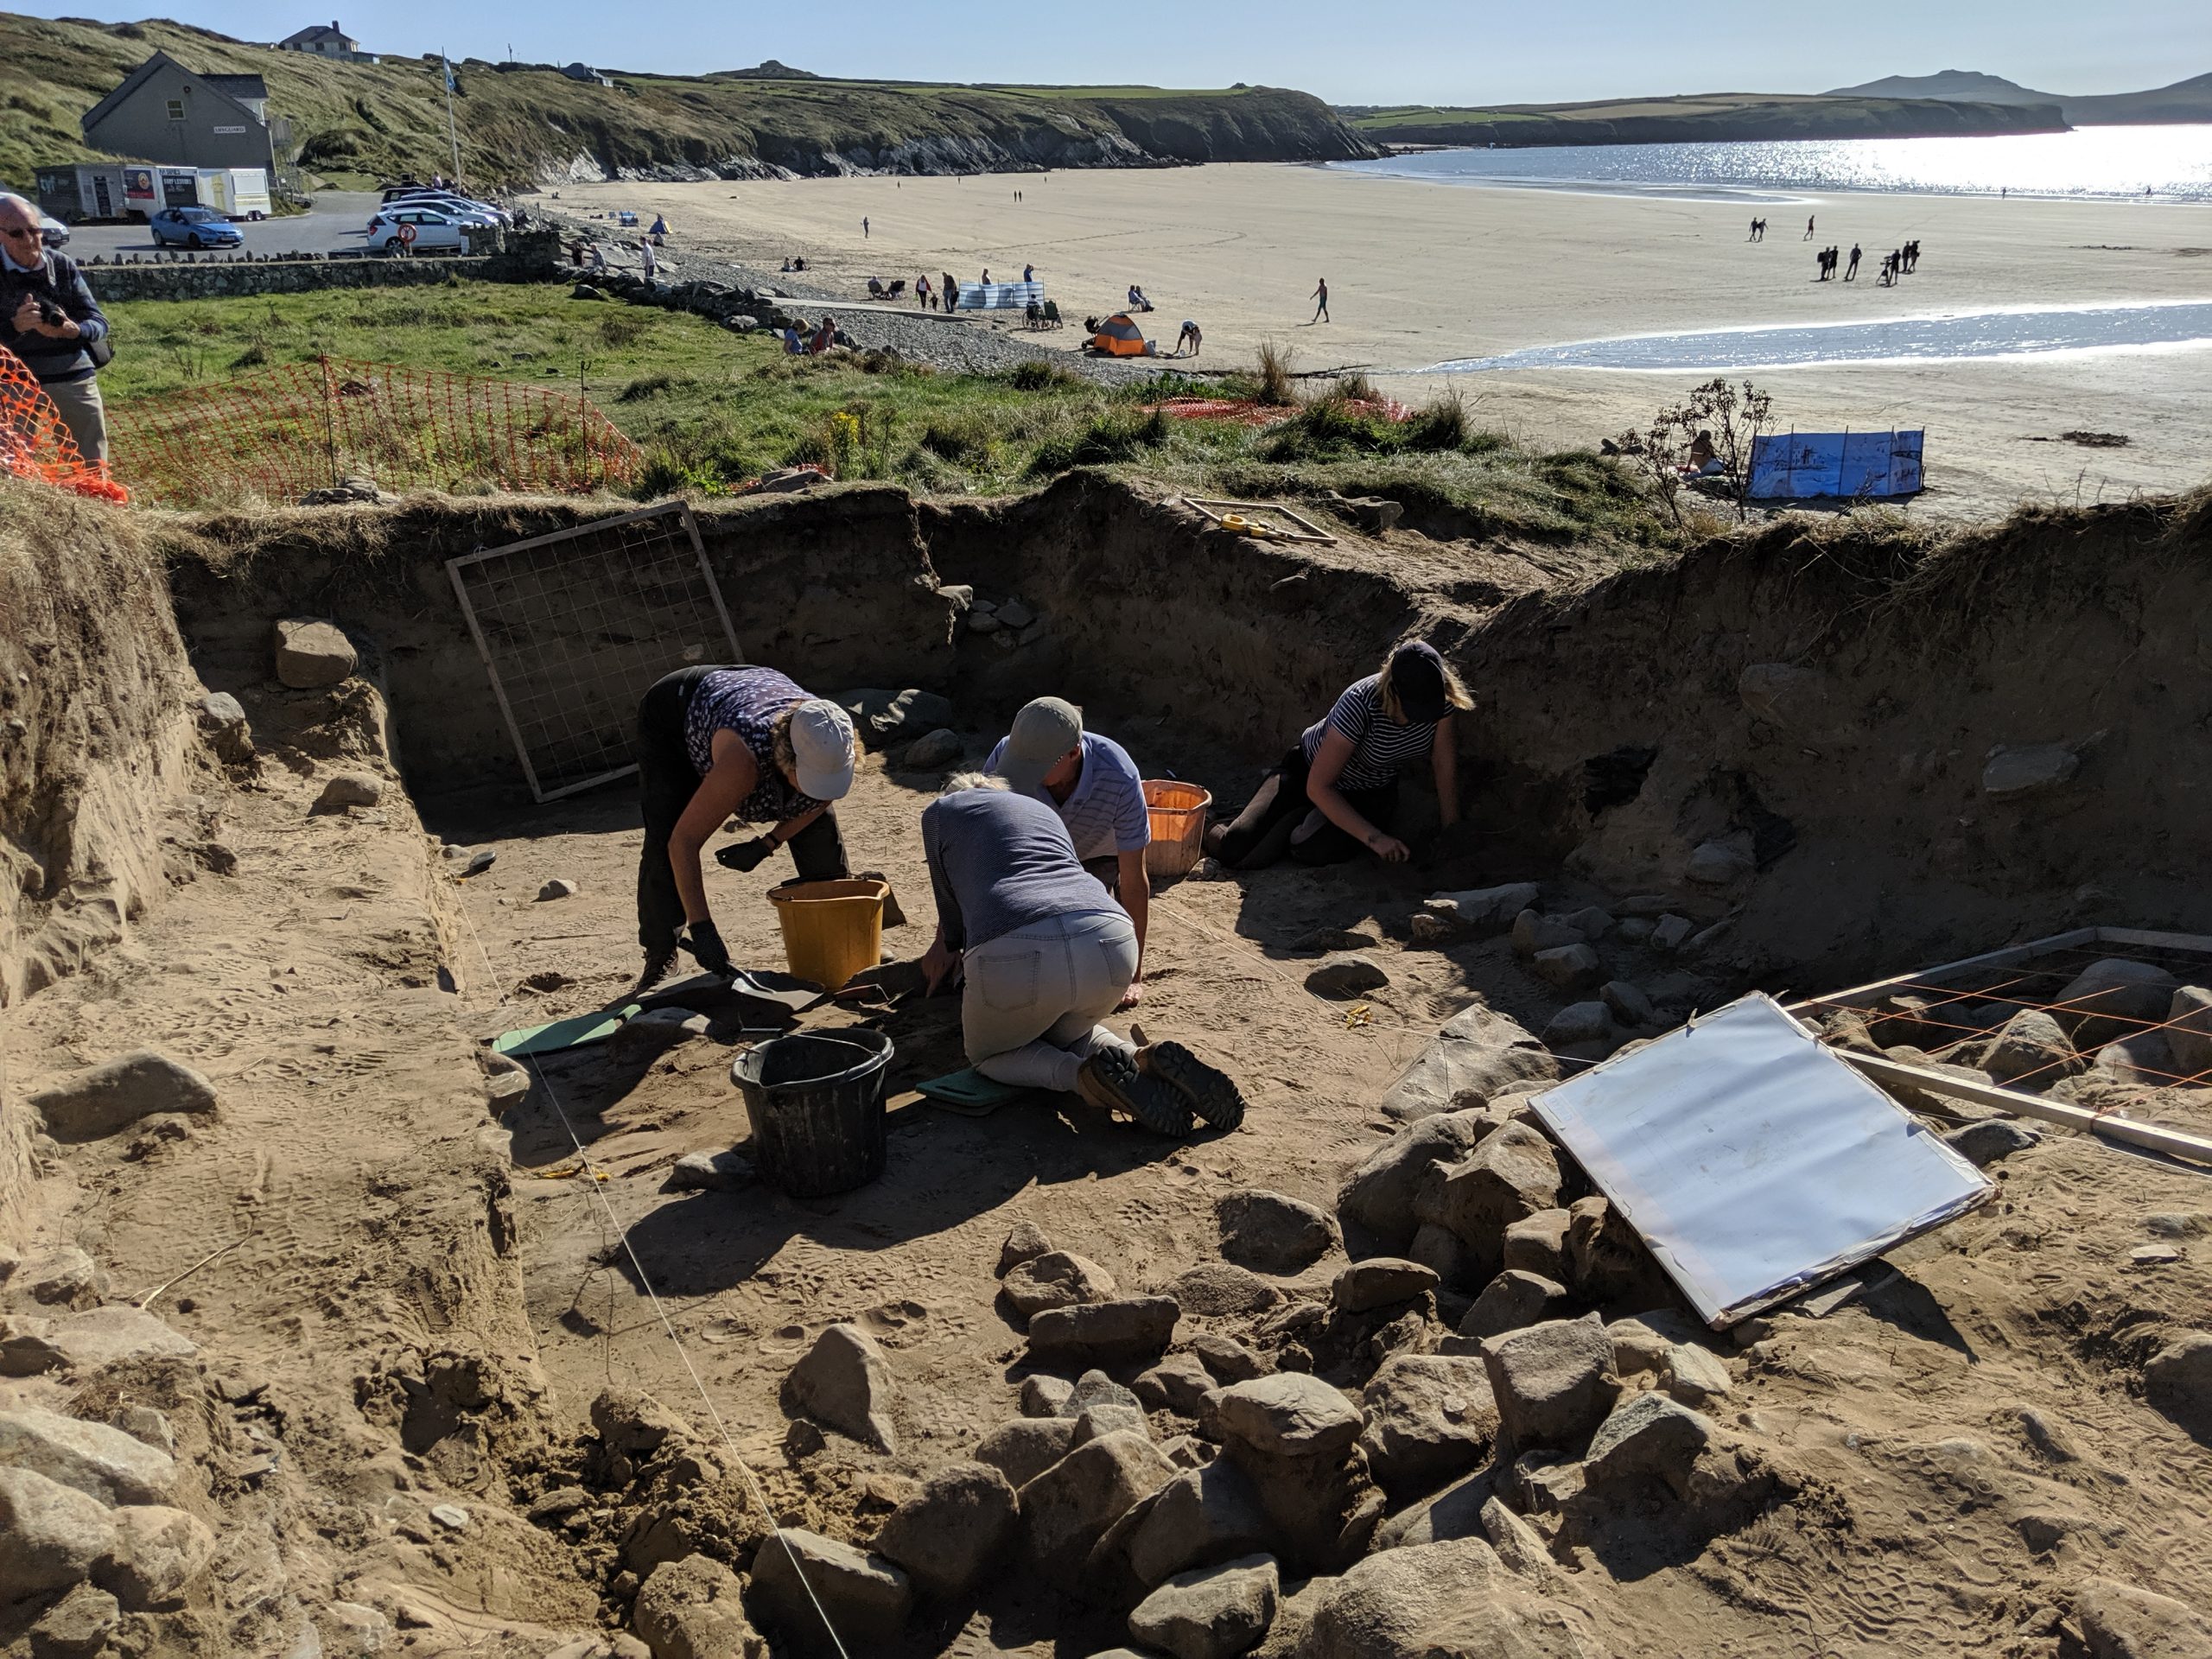 4 people excavating a site as part of an archaeological dig next to a sandy beach. Location pictured is St Patrick's Chapel, Whitesands, St Davids, Pembrokeshire